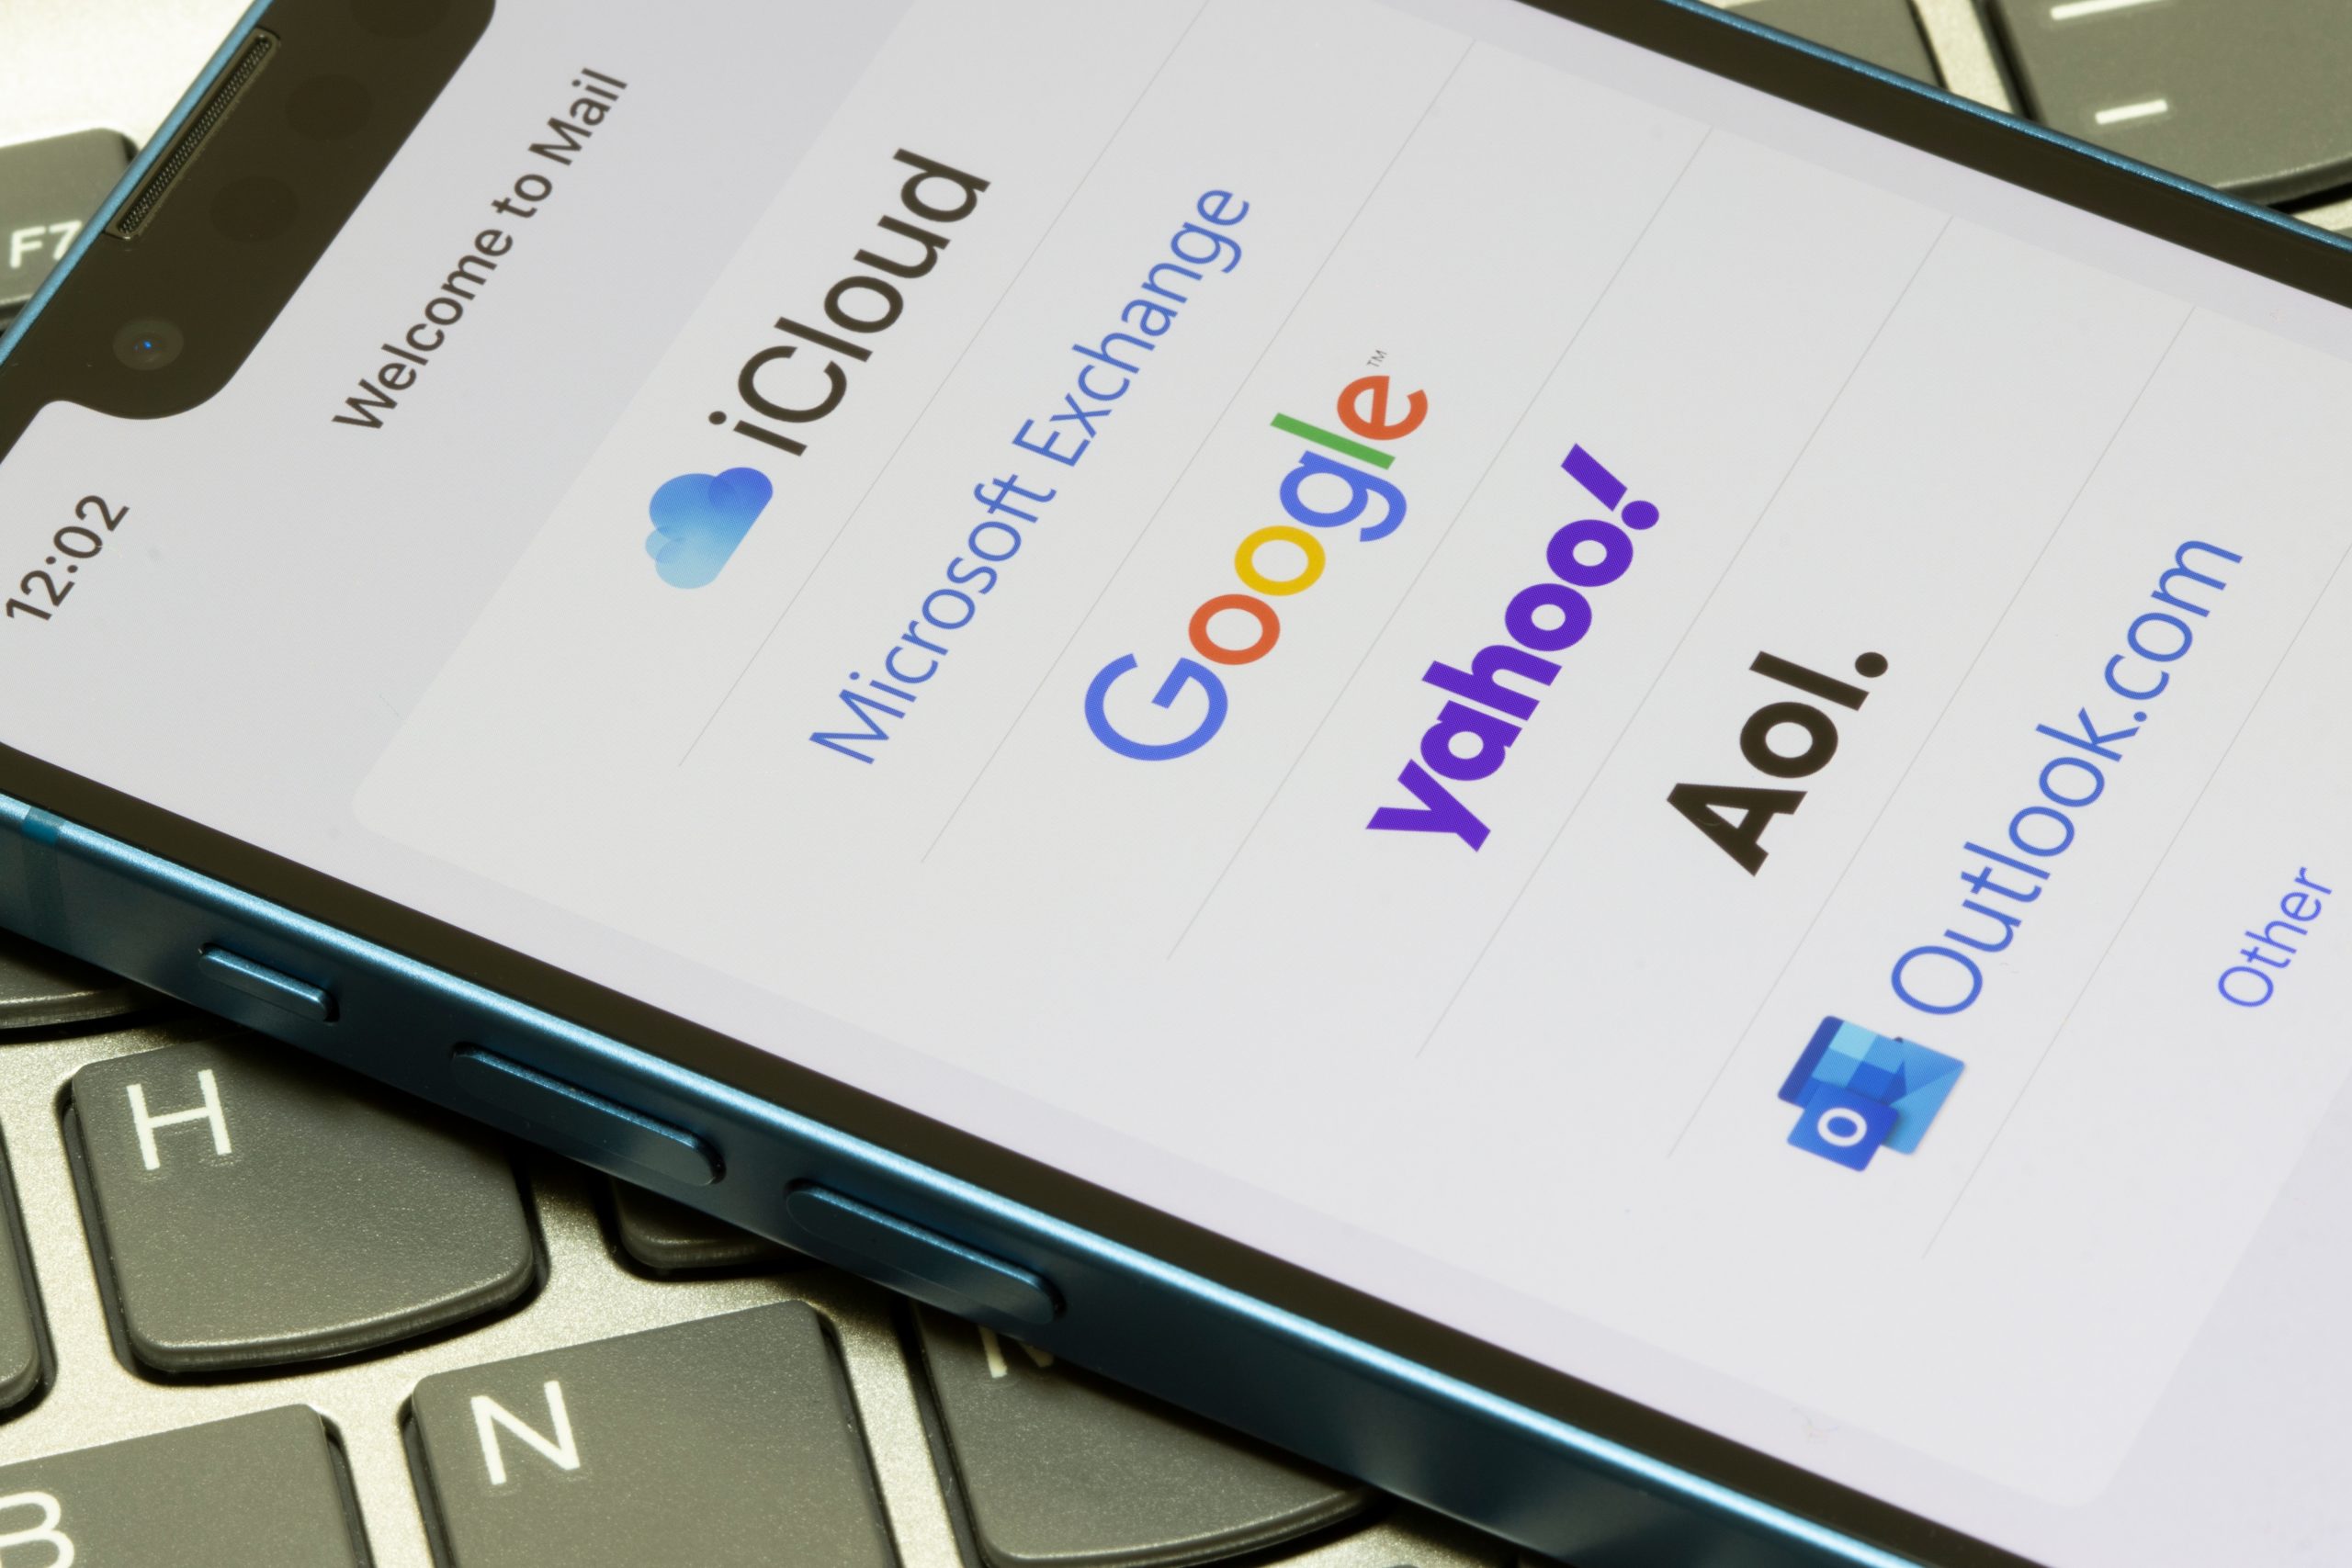 Google and Yahoo Are Cracking Down on Inbox Spam. Don’t Expect Less Email Marketing.